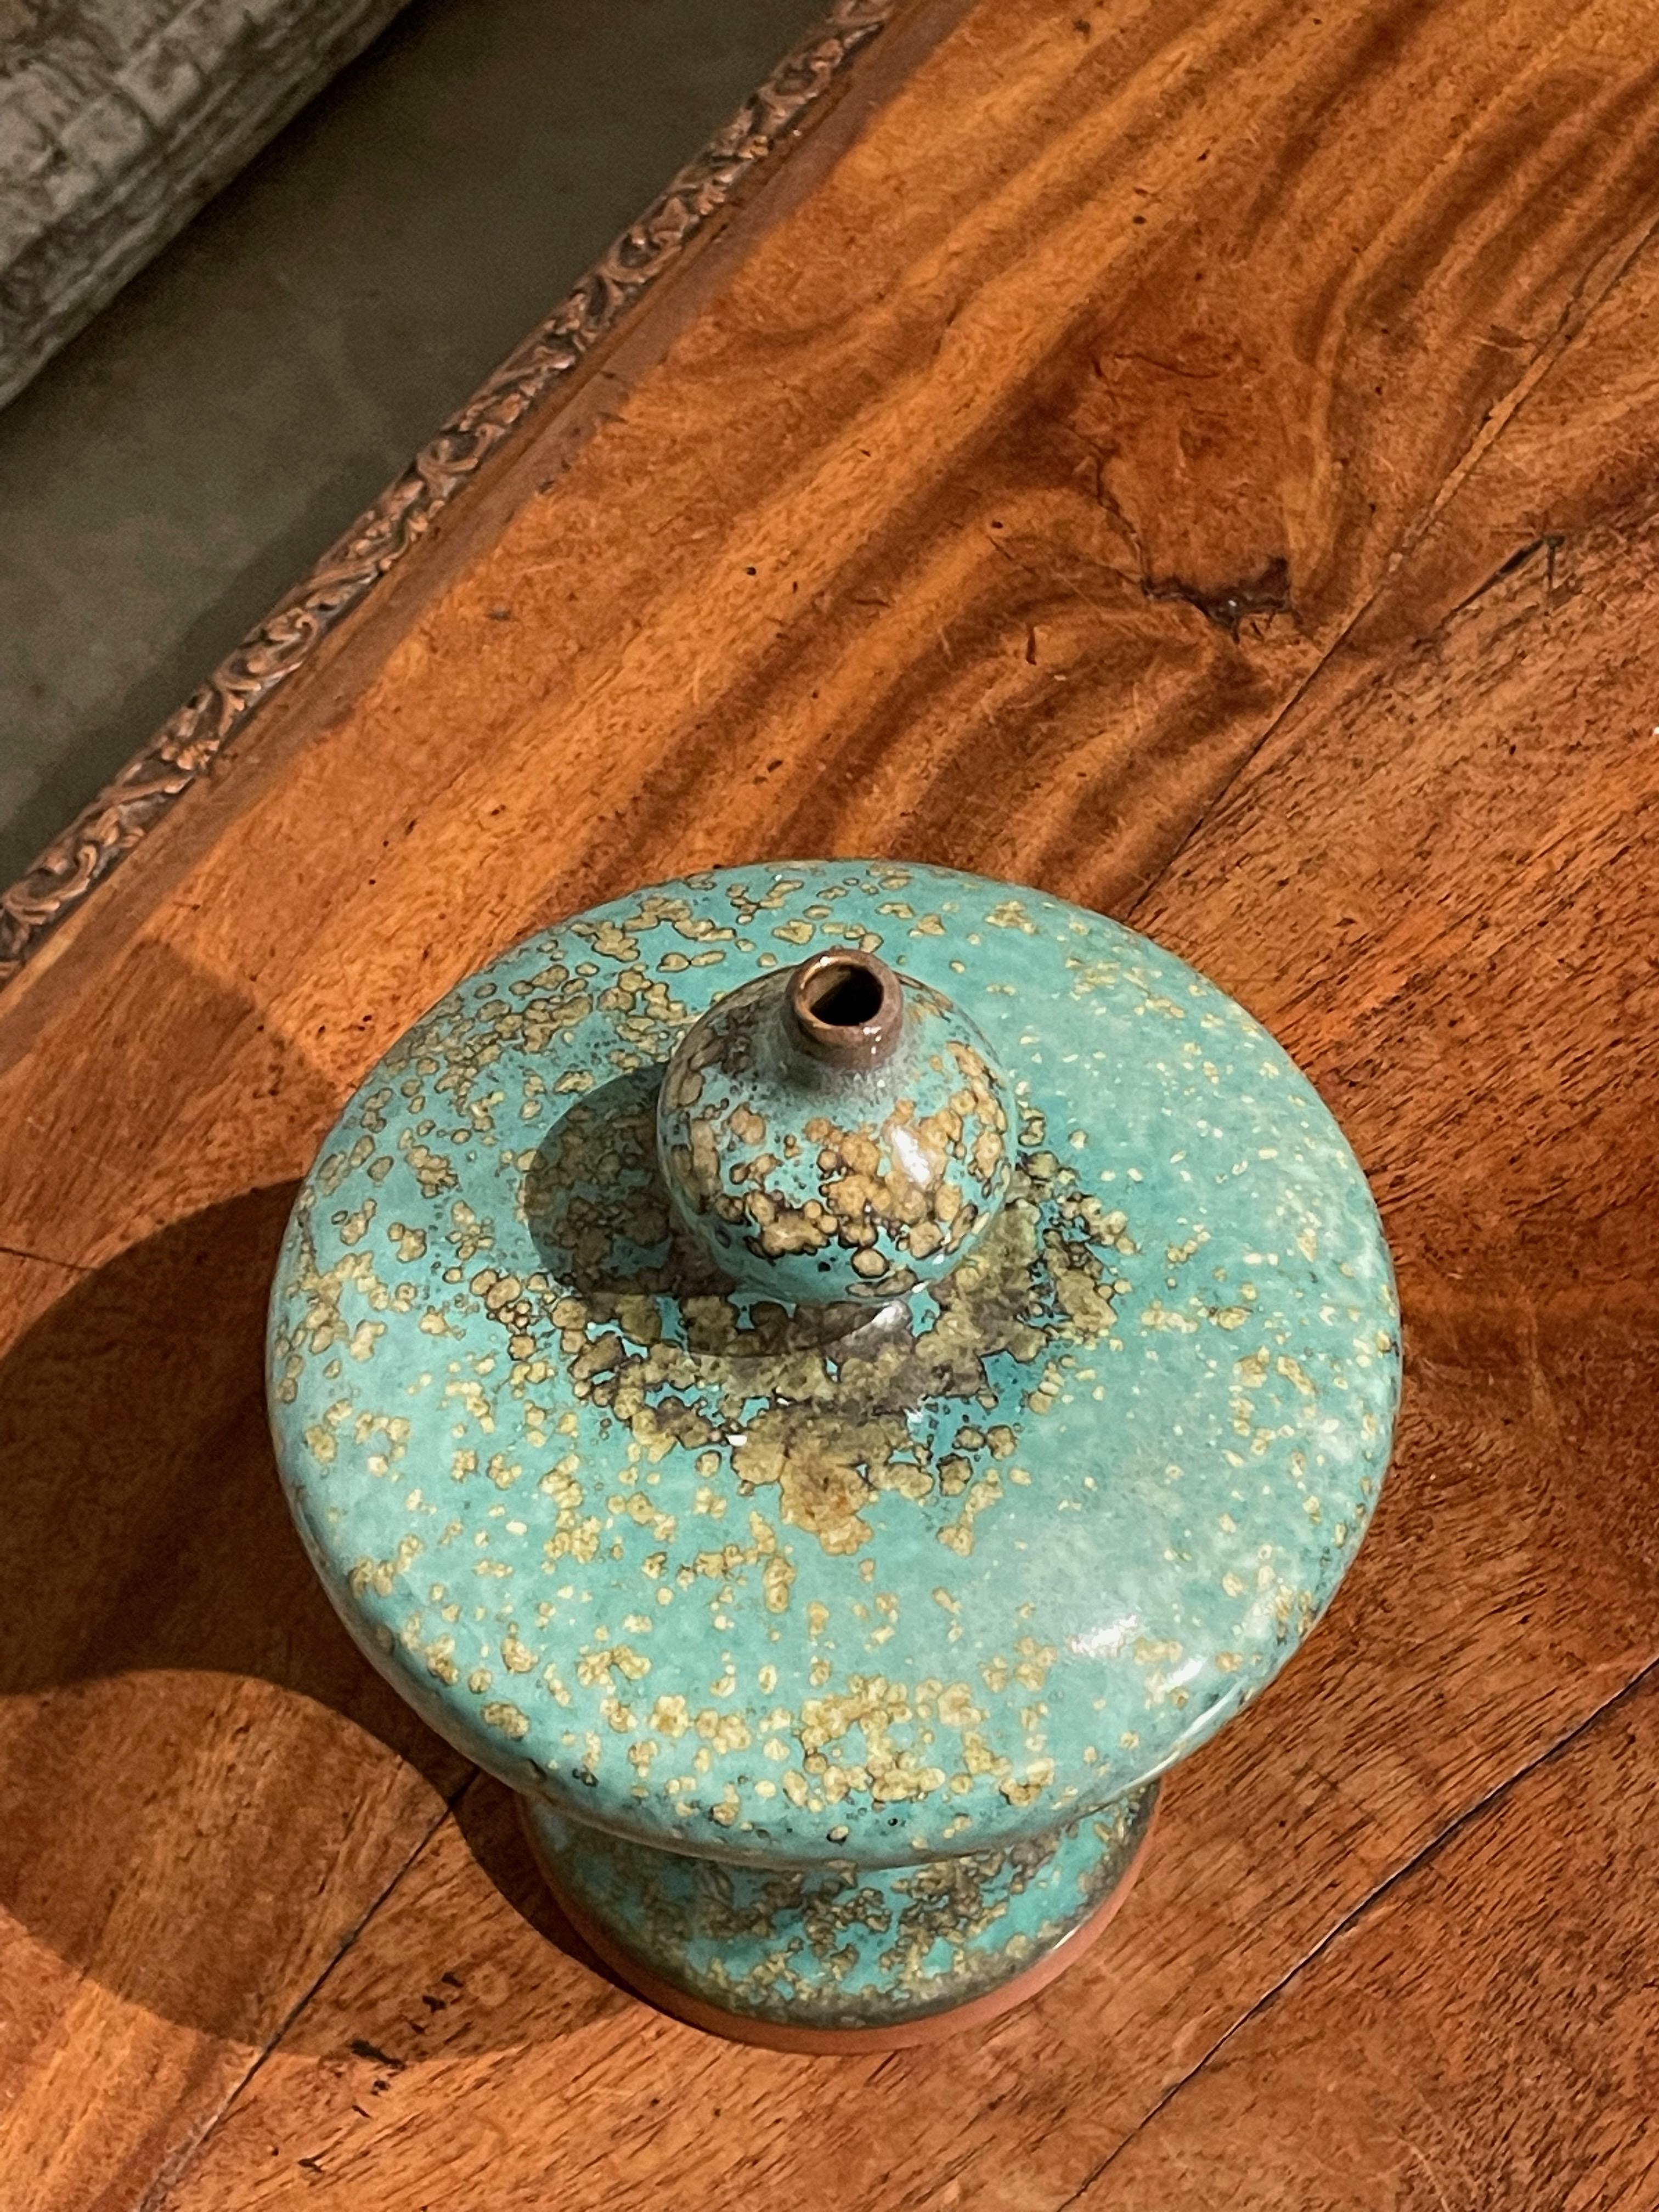 Turquoise with Gold Speckled Glaze Flat Top Vase, China, Contemporary 1